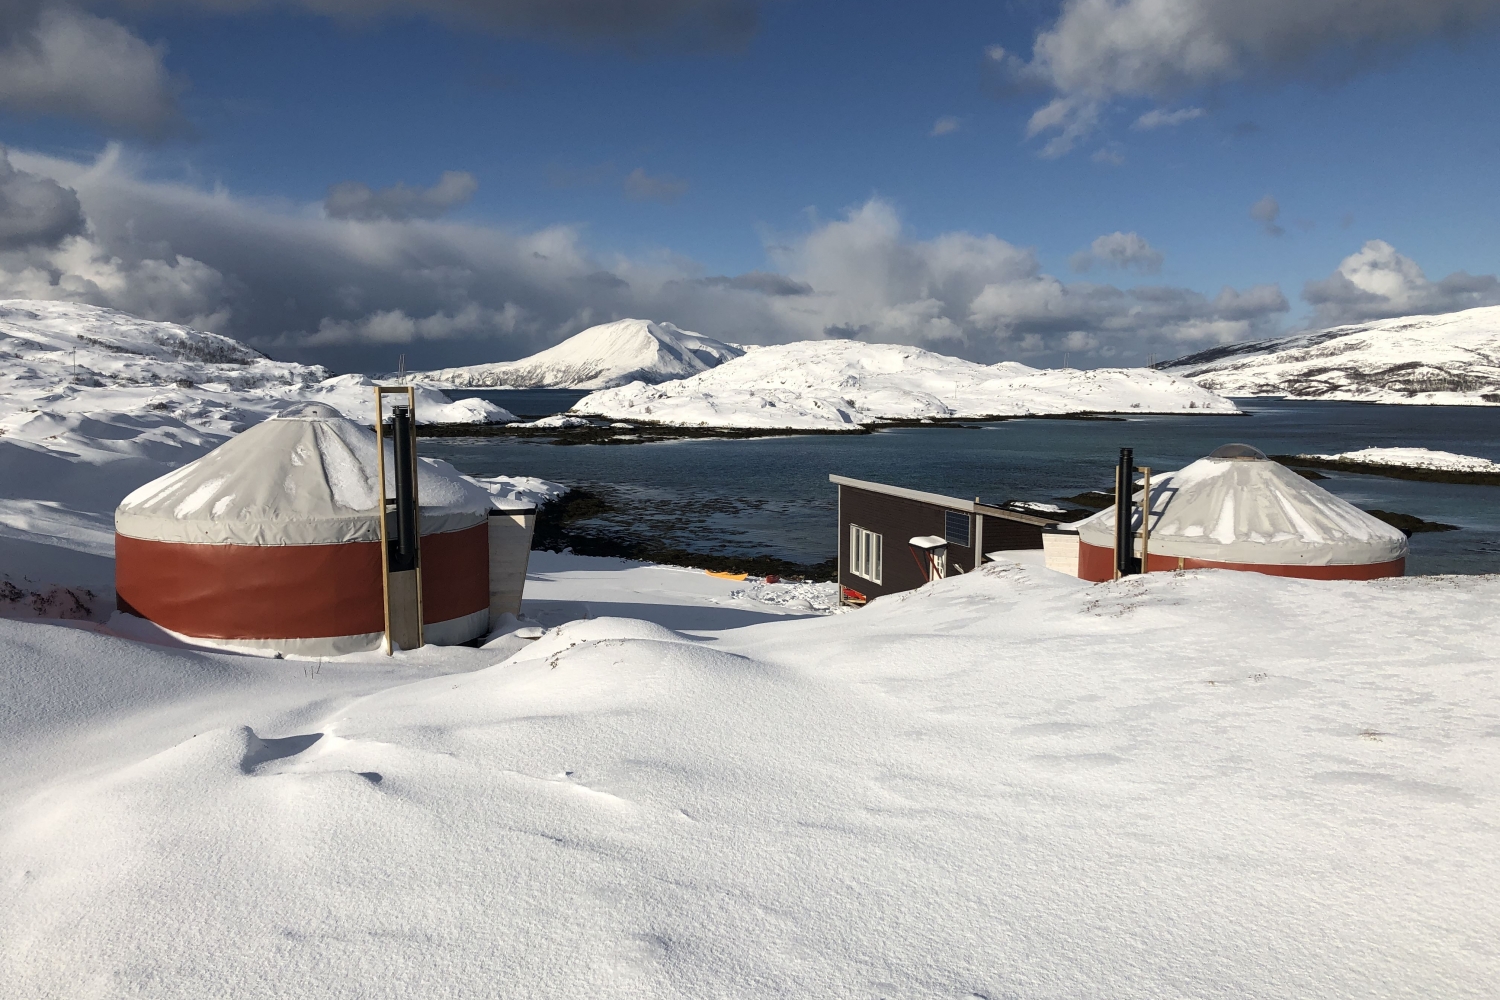 Two yurts by the ocean in winter landscape